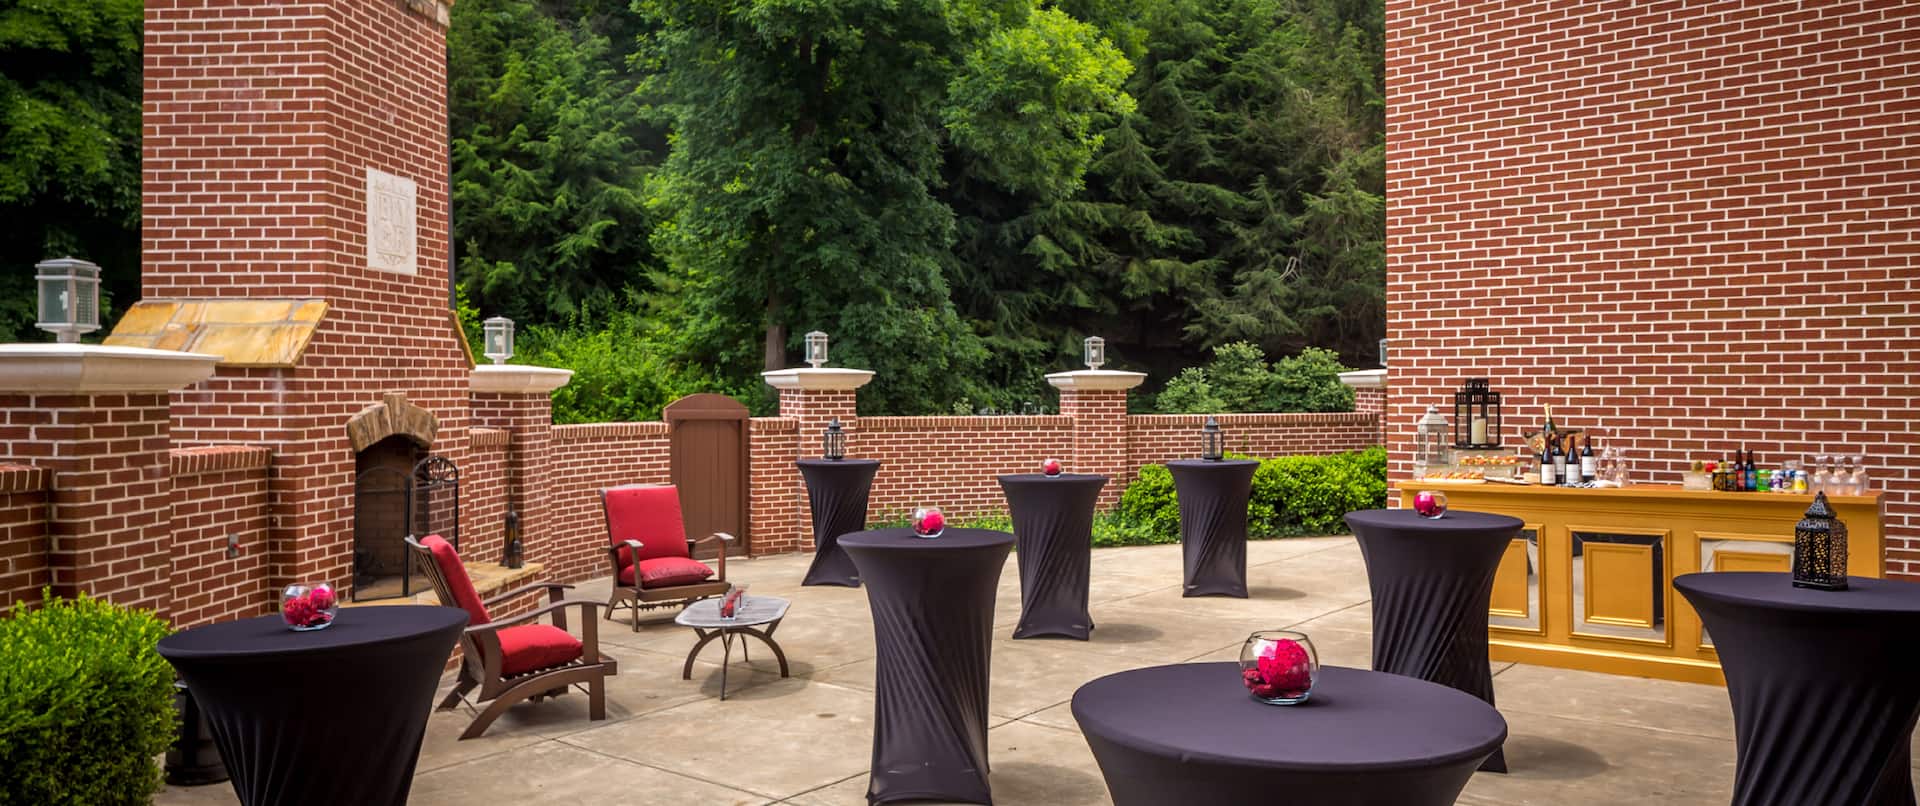 Round Tables With Black Table Covers, Beverage Station, and Red Lounge Chairs Set Up For a Reception on Burghley Terrace